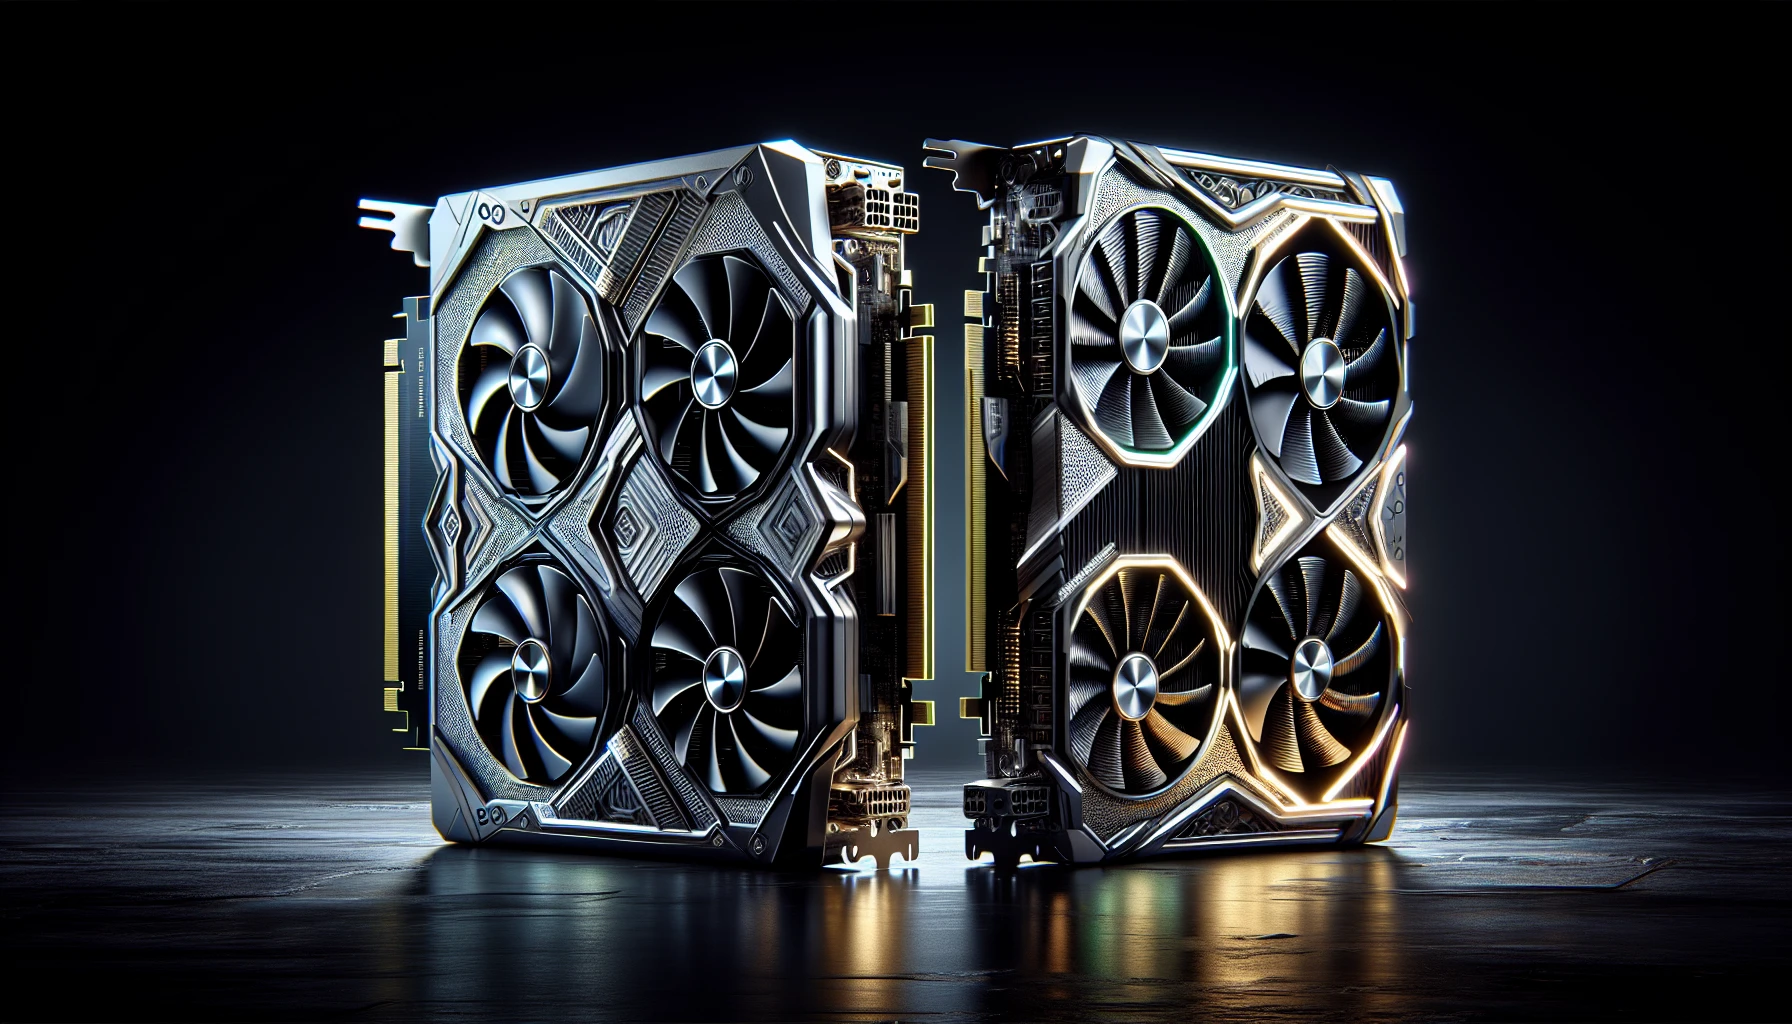 Comparison of core specs including CUDA cores, clock speeds, and memory configurations of NVIDIA RTX 3090 and RTX 4090.